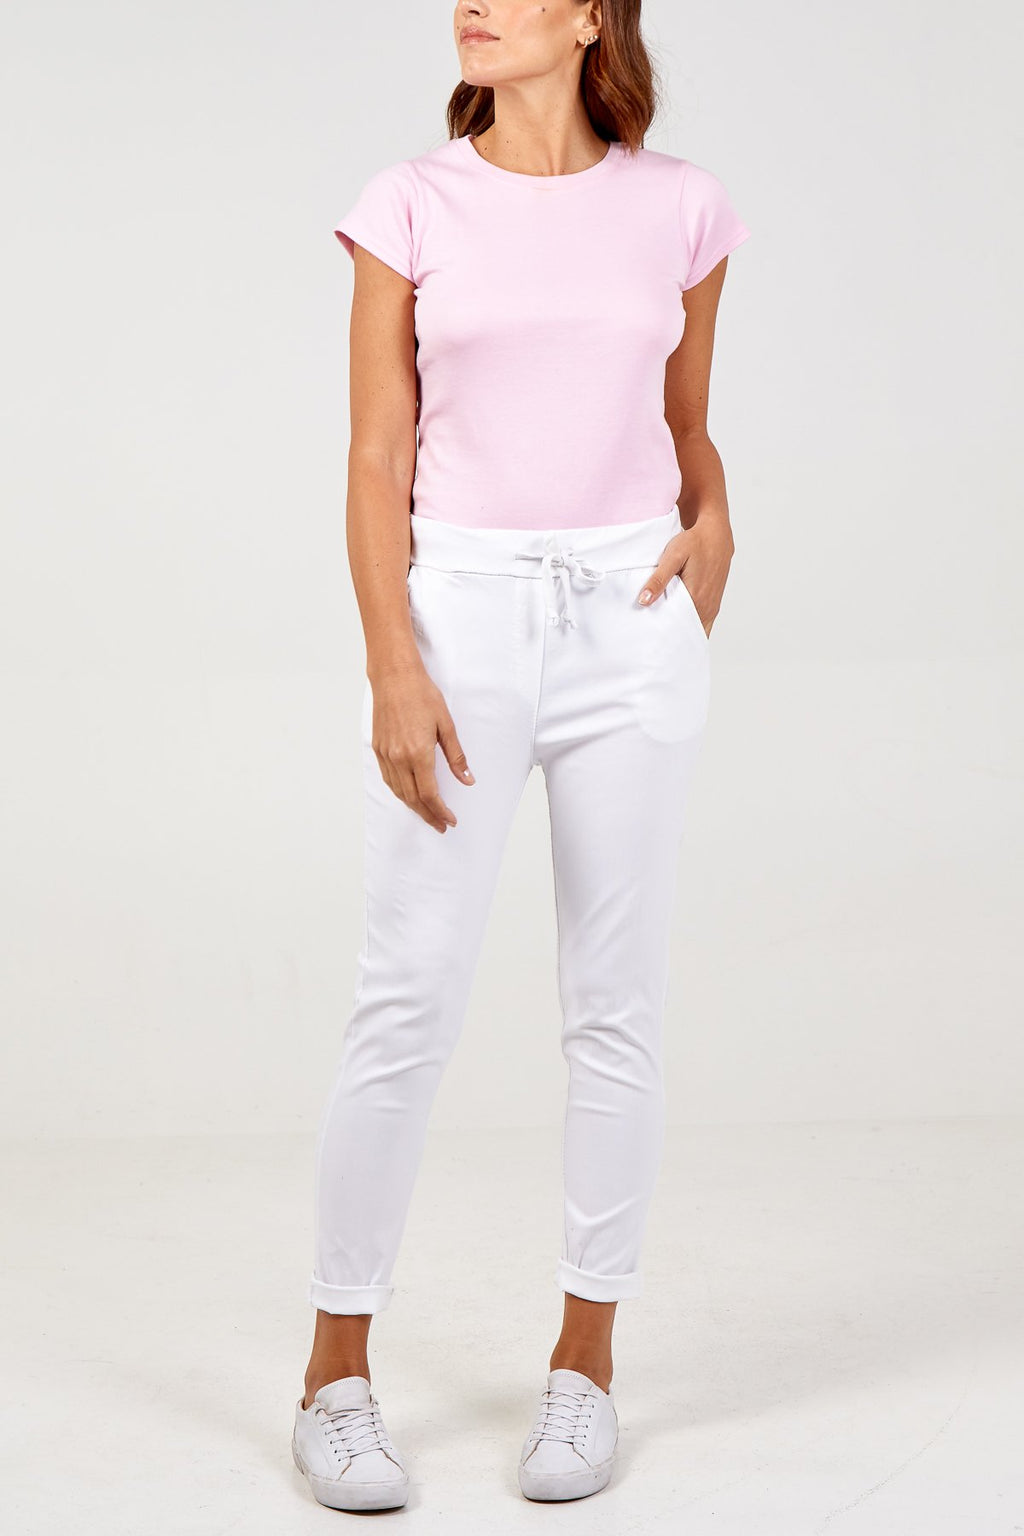 A model wearing plain white colour magic trousers and a pink t shirt and trainers 